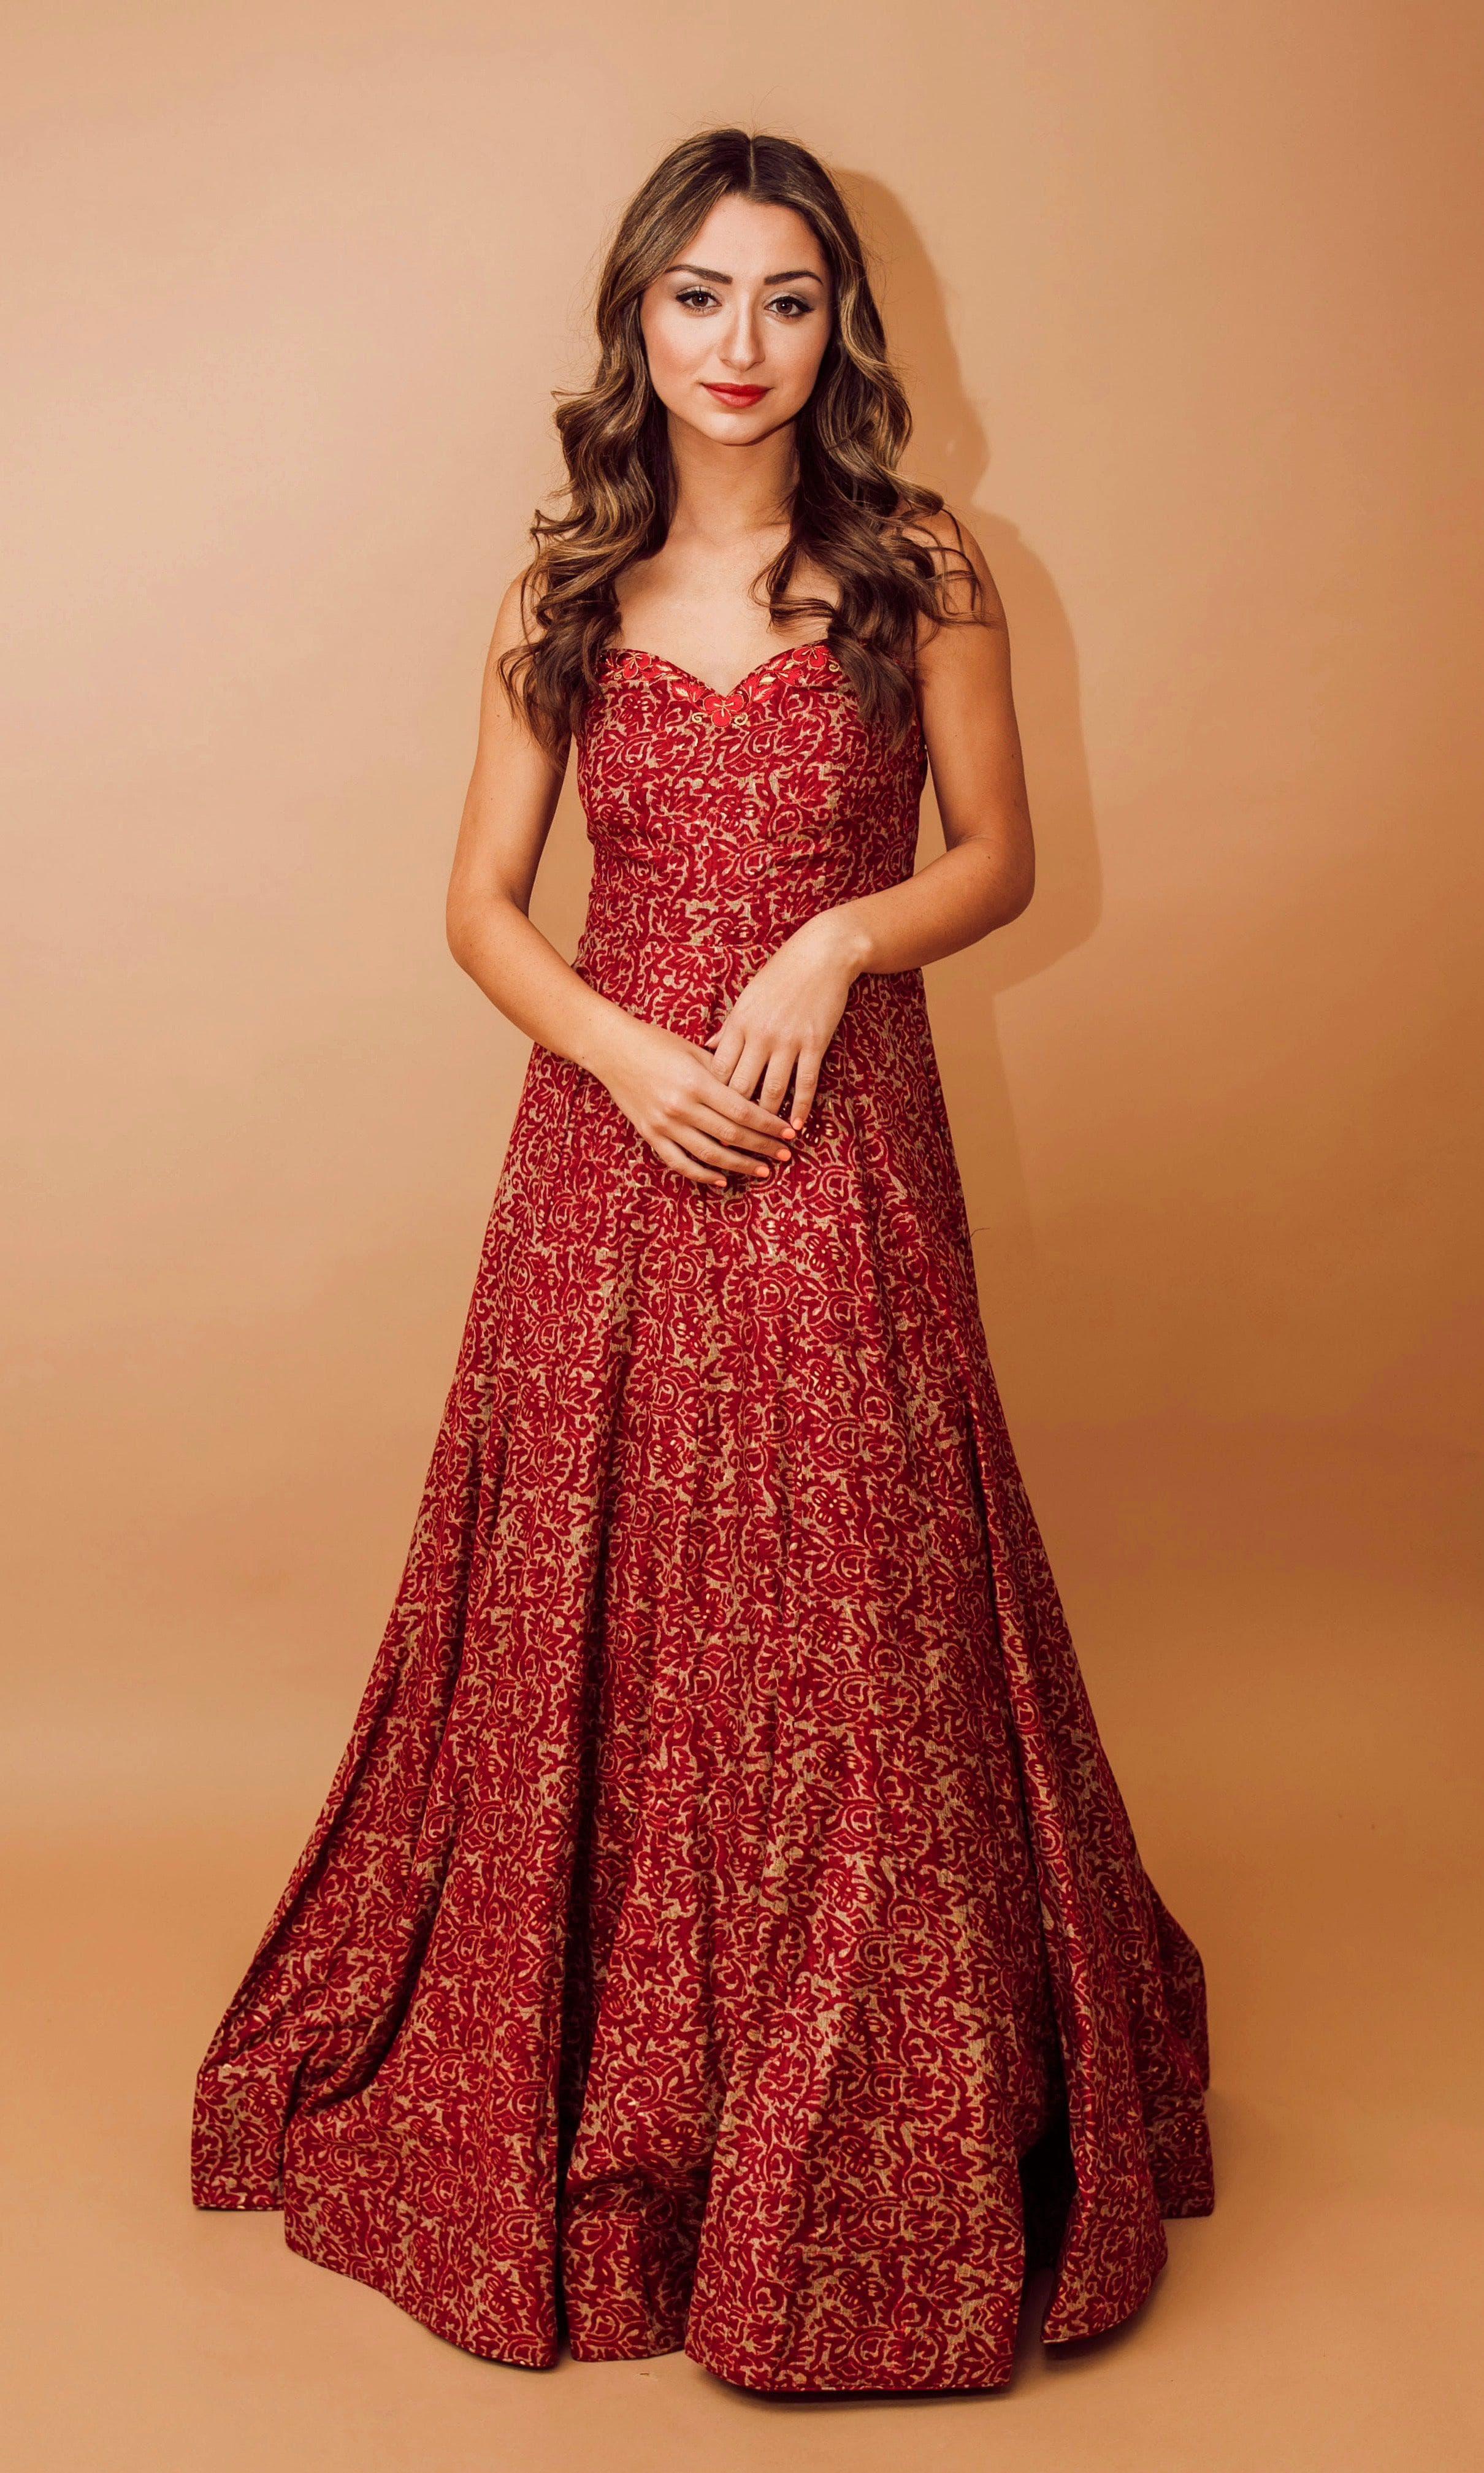 11 Ideas to Wear Red Outfits As Bridesmaids & Not Look like the Bride |  WeddingBazaar